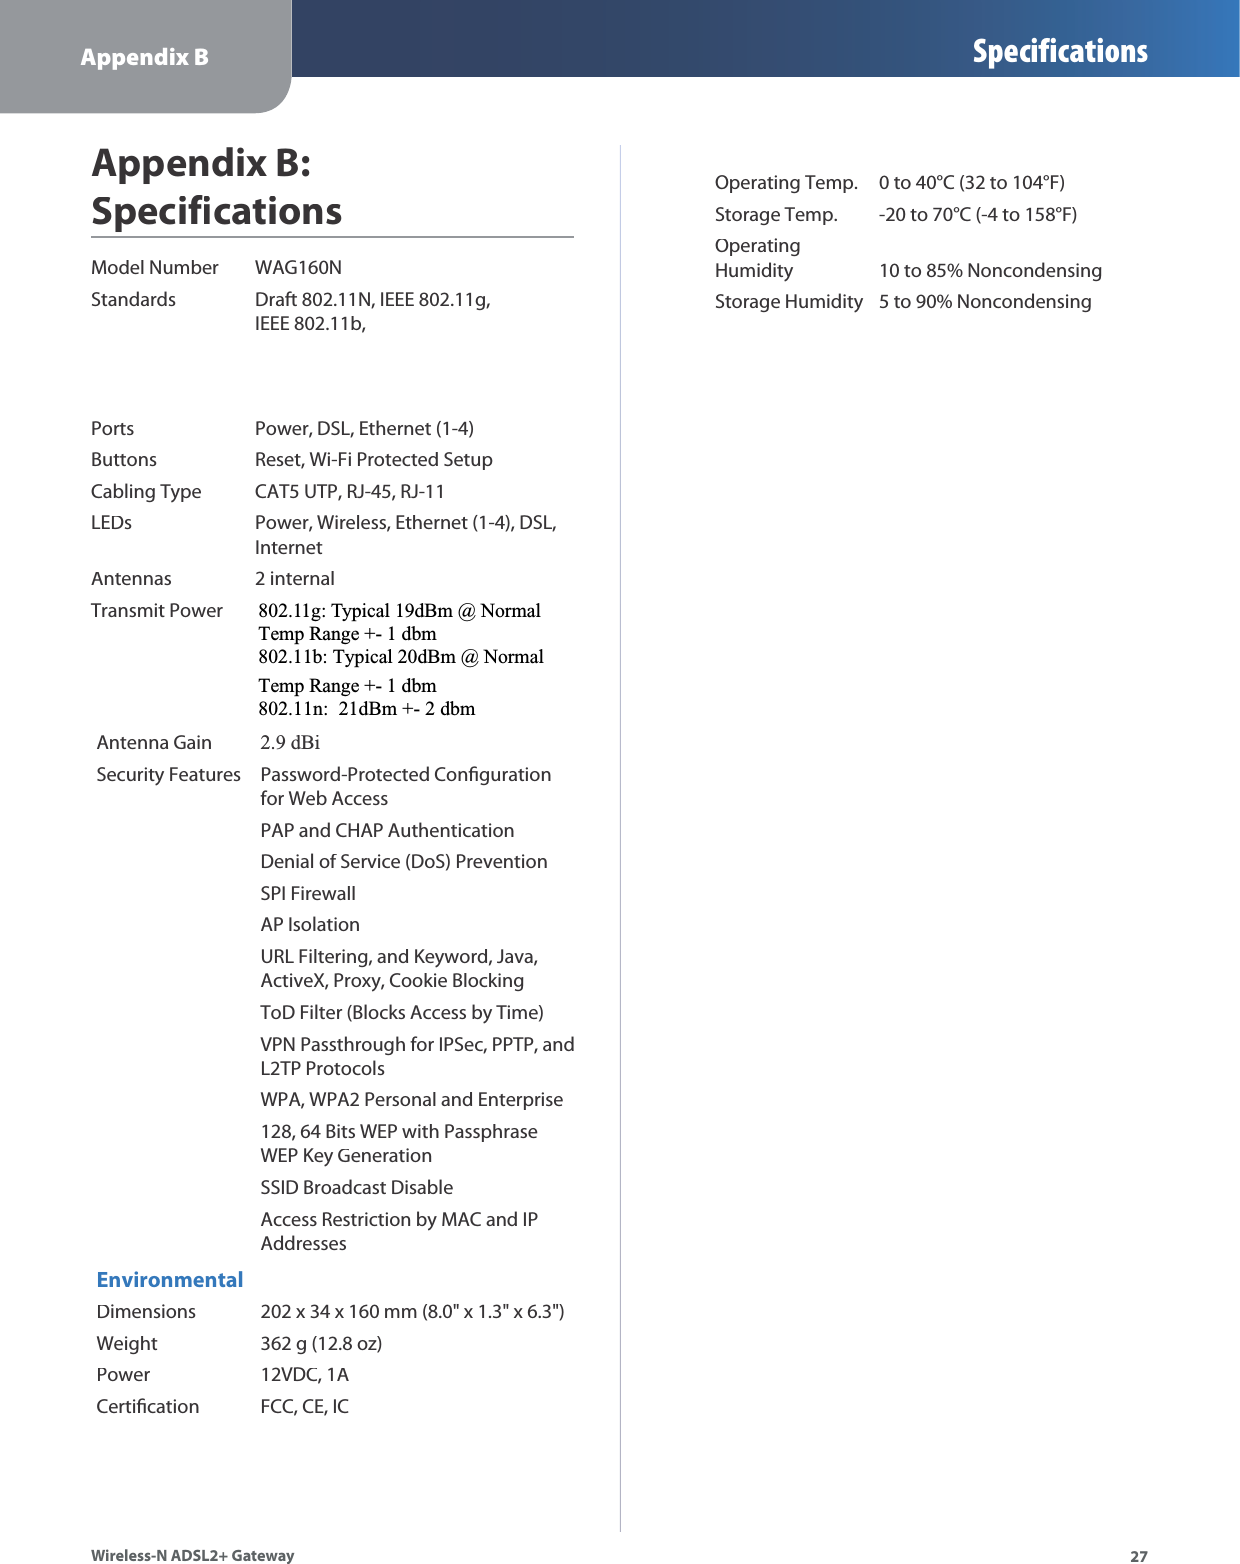 Appendix B Specifications27Wireless-N ADSL2+ GatewayAppendix B:SpecificationsModel NumberWAG160NStandardsDraft 802.11N, IEEE 802.11g,IEEE 802.11b,PortsPower, DSL, Ethernet (1-4)ButtonsReset, Wi-Fi Protected SetupCabling TypeCAT5 UTP, RJ-45, RJ-11LEDsPower, Wireless, Ethernet (1-4), DSL,InternetAntennas 2 internalTransmit PowerAntenna Gain2.9 dBiSecurity FeaturesPassword-Protected Congurationfor Web AccessPAP and CHAP AuthenticationDenial of Service (DoS) PreventionSPI FirewallAP IsolationURL Filtering, and Keyword, Java,ActiveX, Proxy, Cookie BlockingToD Filter (Blocks Access by Time)VPN Passthrough for IPSec, PPTP, andL2TP ProtocolsWPA, WPA2 Personal and Enterprise128, 64 Bits WEP with PassphraseWEP Key GenerationSSID Broadcast DisableAccess Restriction by MAC and IPAddressesEnvironmentalDimensions202 x 34 x 160 mm (8.0&quot; x 1.3&quot; x 6.3&quot;)Weight362 g (12.8 oz)Power12VDC, 1ACerticationFCC, CE, ICOperating Temp.0 to 40°C (32 to 104°F)Storage Temp.-20 to 70°C (-4 to 158°F)OperatingHumidity10 to 85% NoncondensingStorage Humidity5 to 90% Noncondensing802.11g: Typical 19dBm @ NormalTemp Range +- 1 dbm 802.11b: Typical 20dBm @ Normal Temp Range +- 1 dbm 802.11n:  21dBm +- 2 dbm 